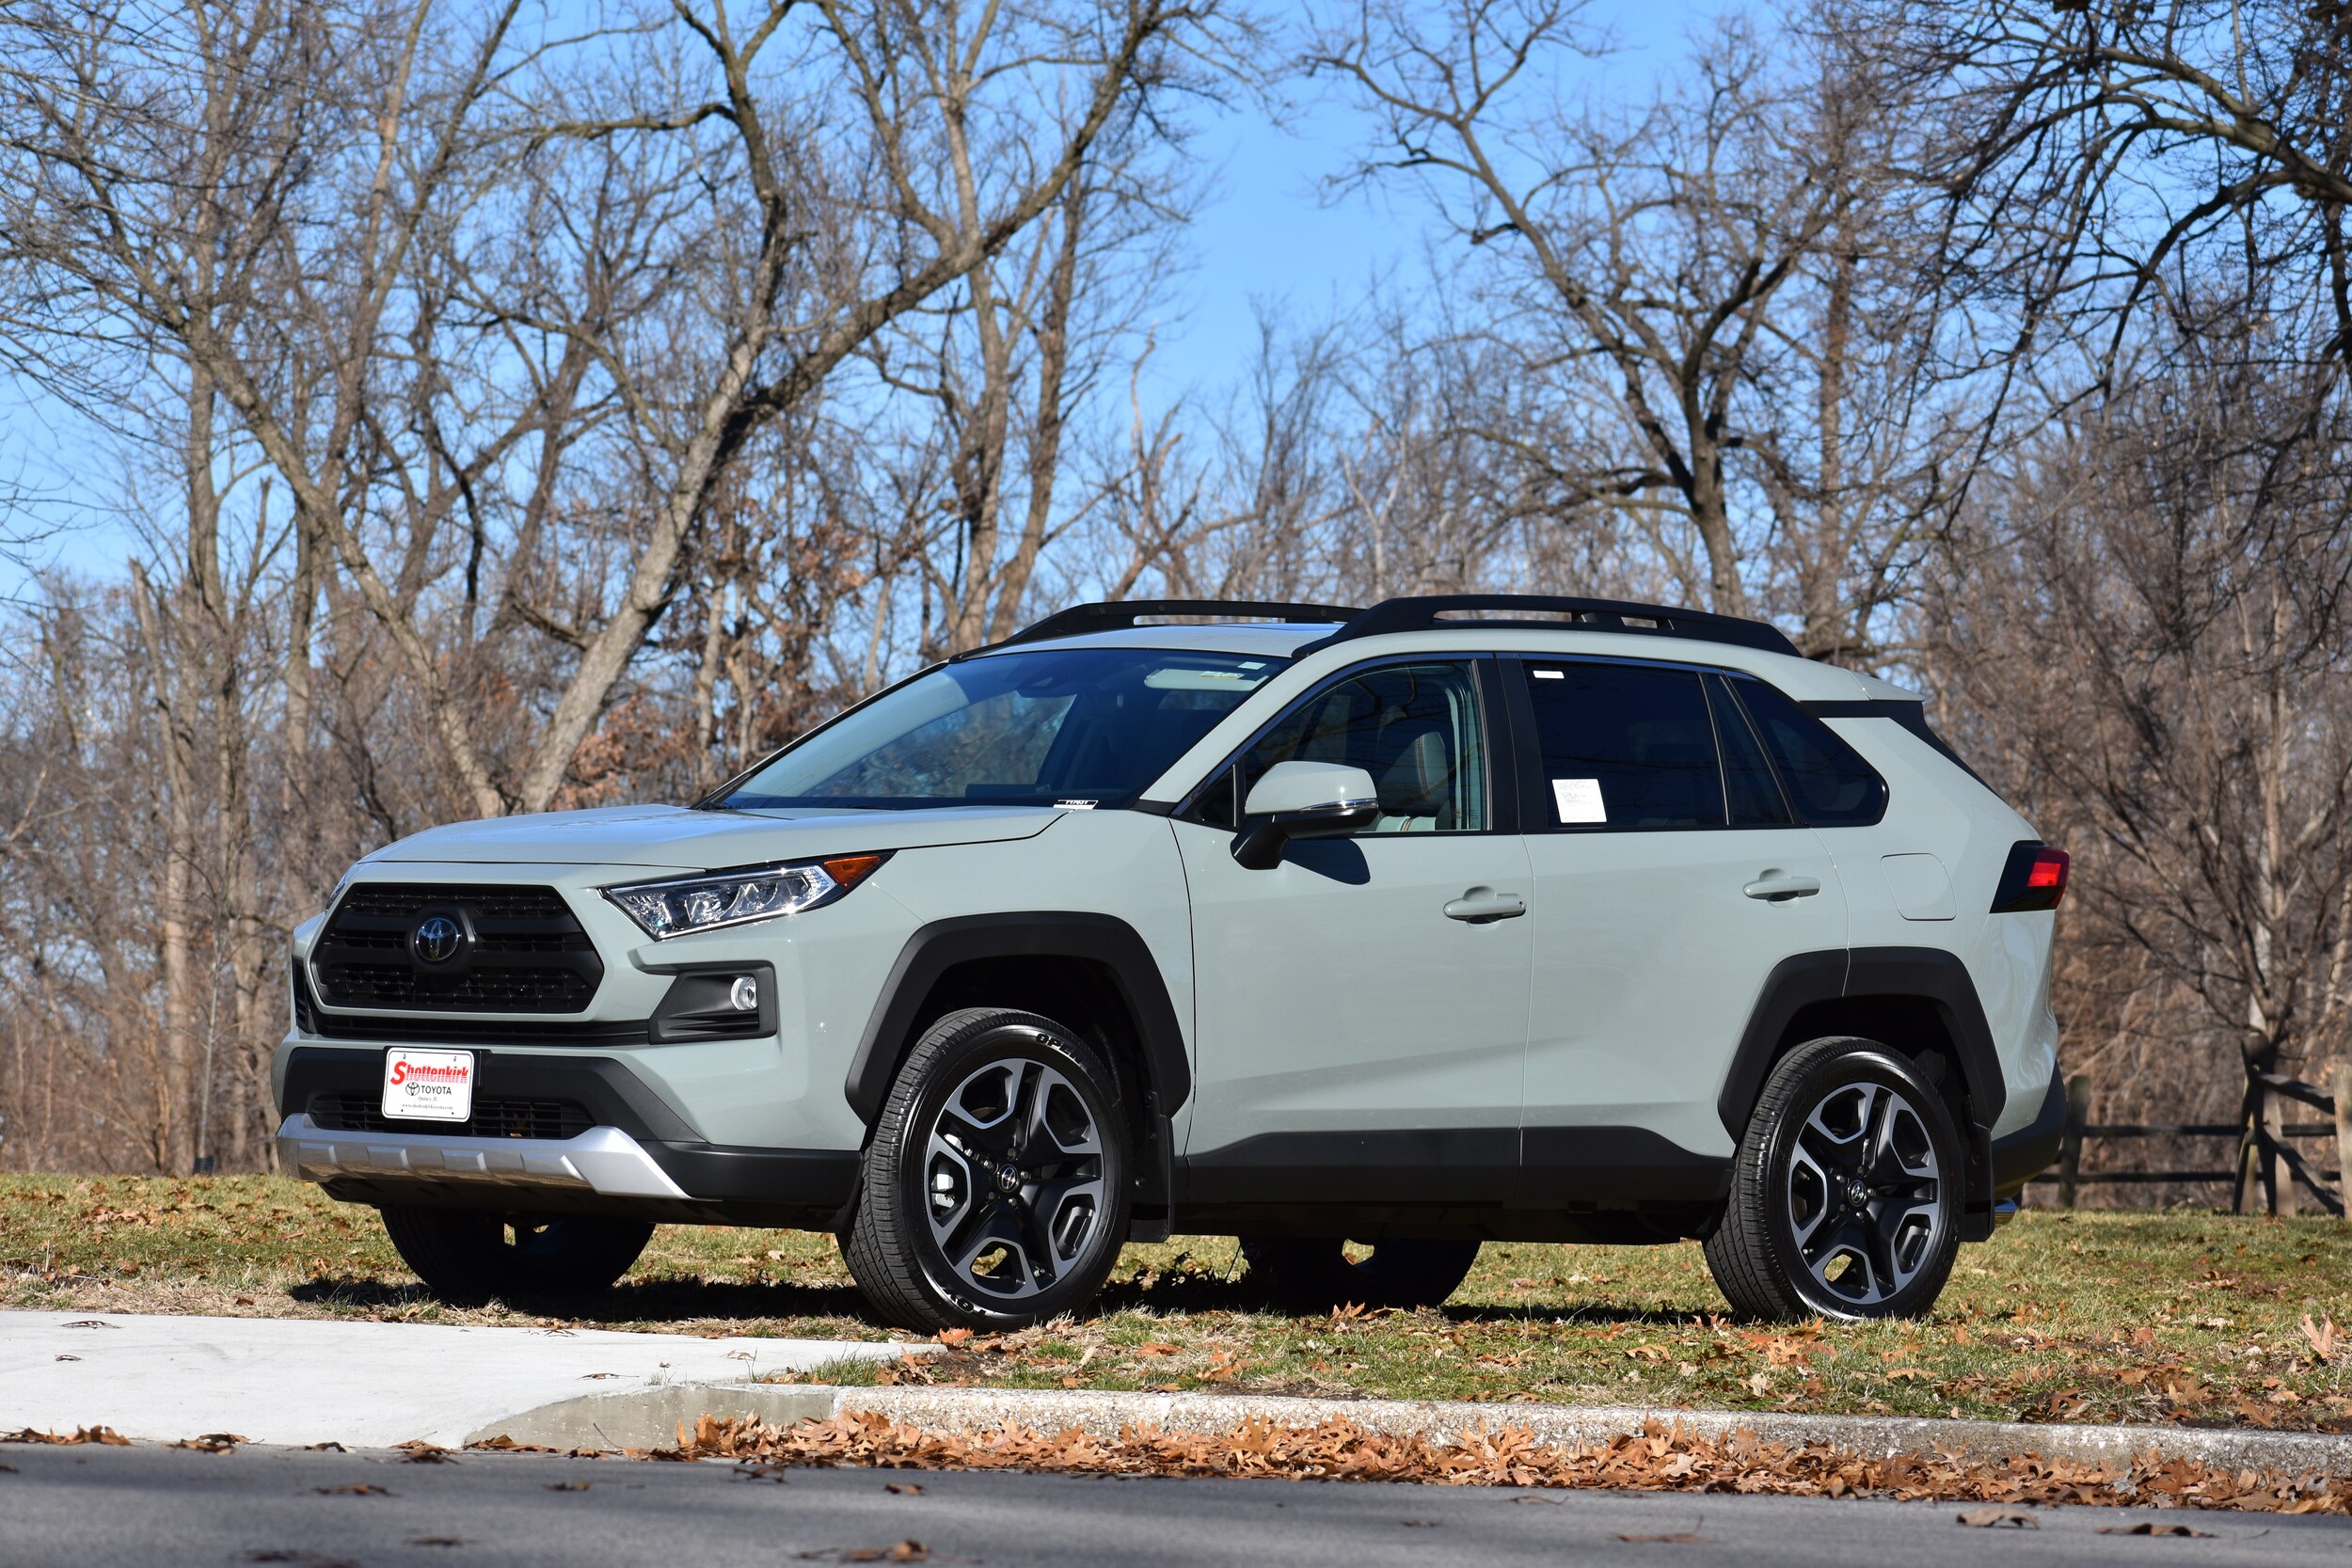 When Does The 2019 Toyota Rav4 Come Out All The Best Cars